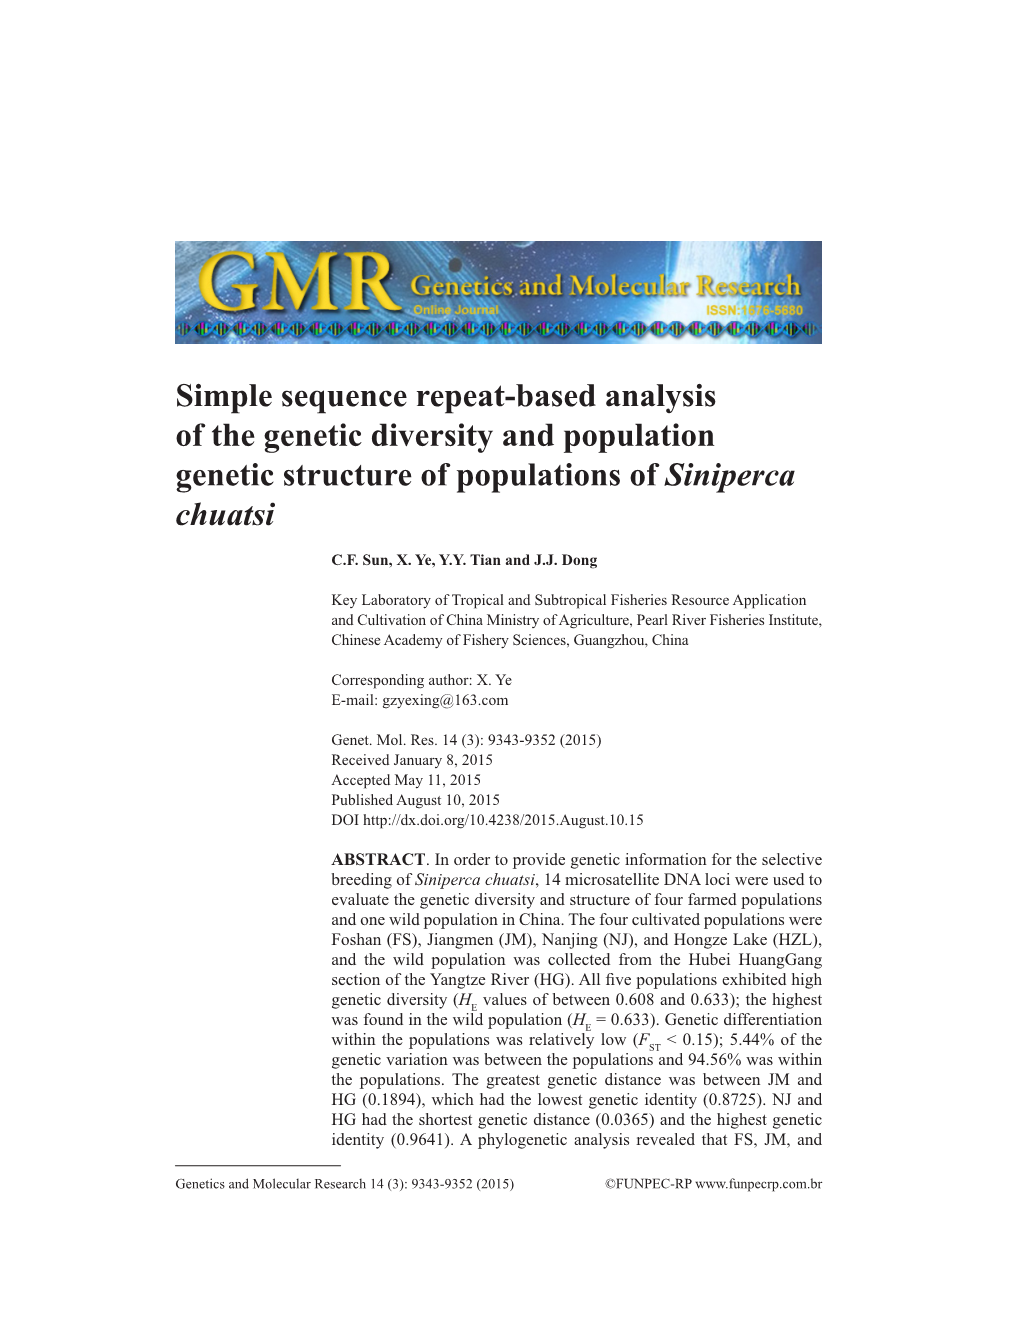 Simple Sequence Repeat-Based Analysis of the Genetic Diversity and Population Genetic Structure of Populations of Siniperca Chuatsi